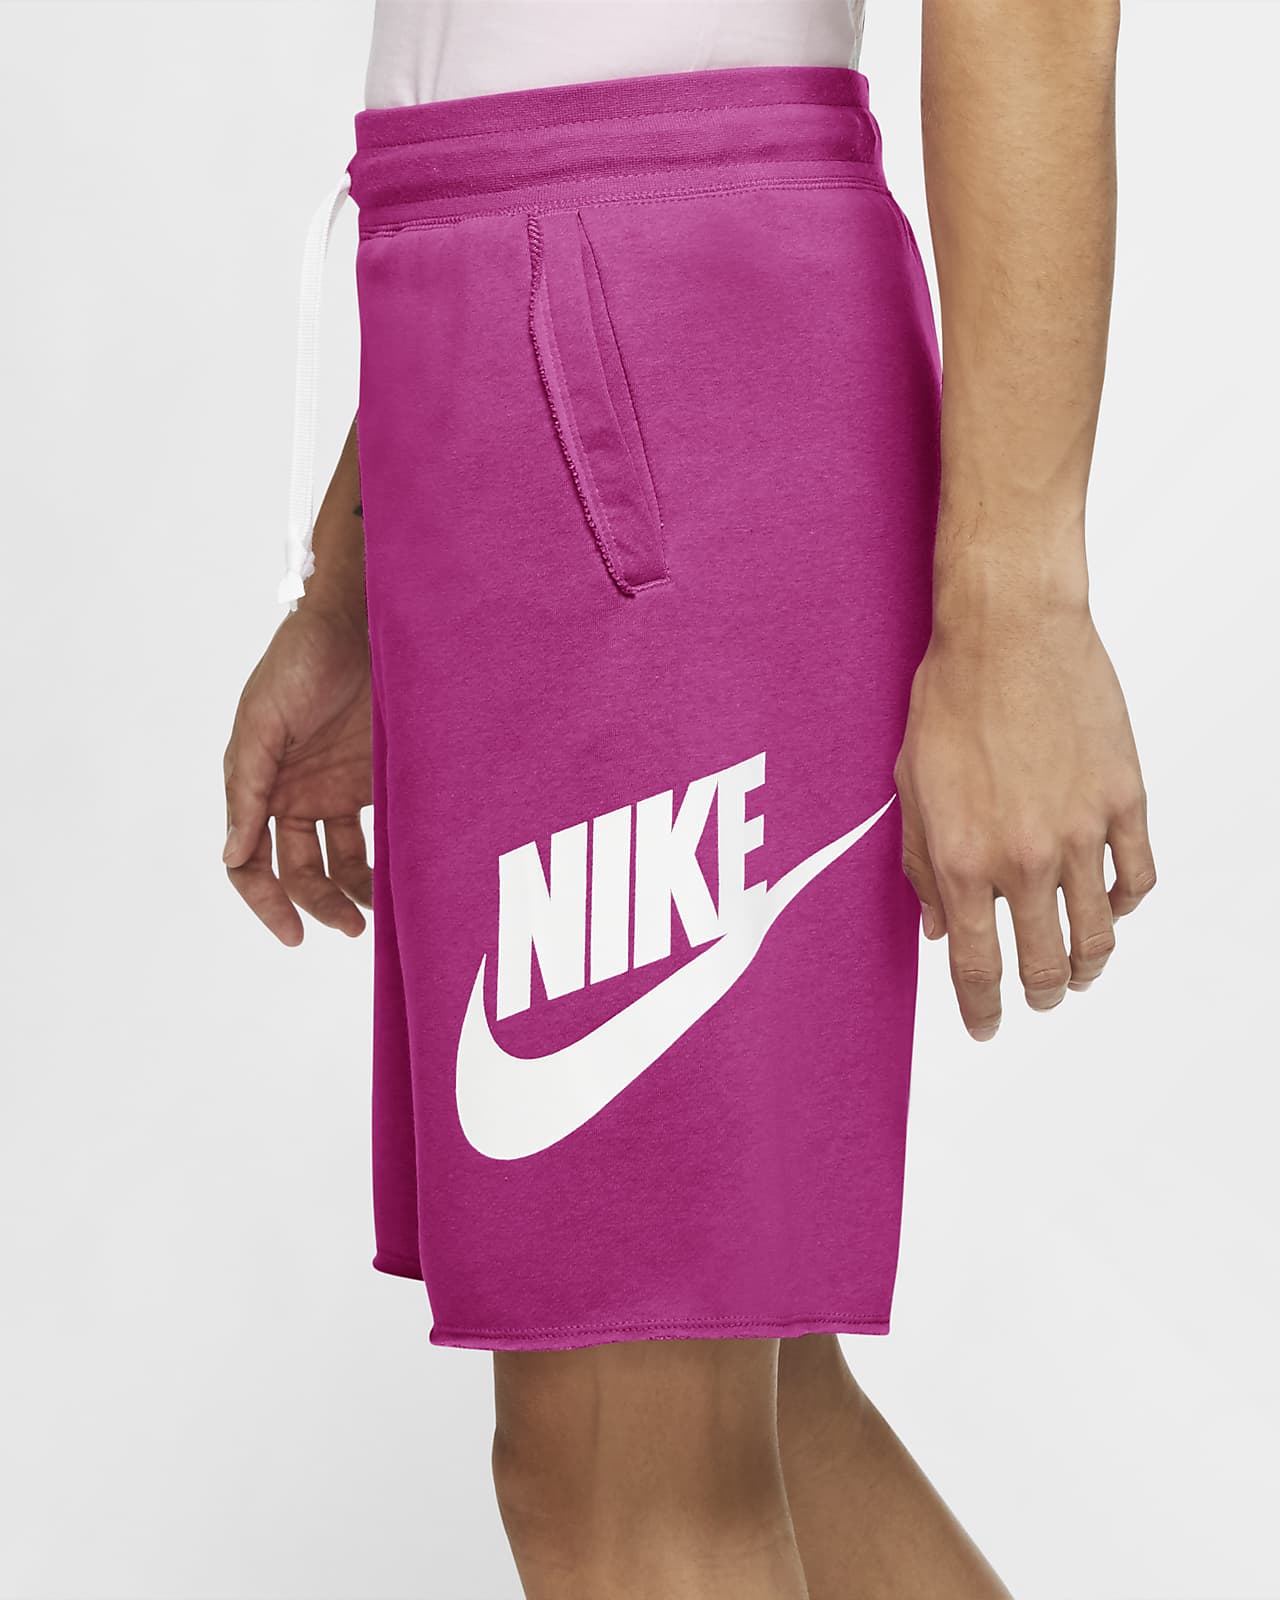 men's french terry shorts nike